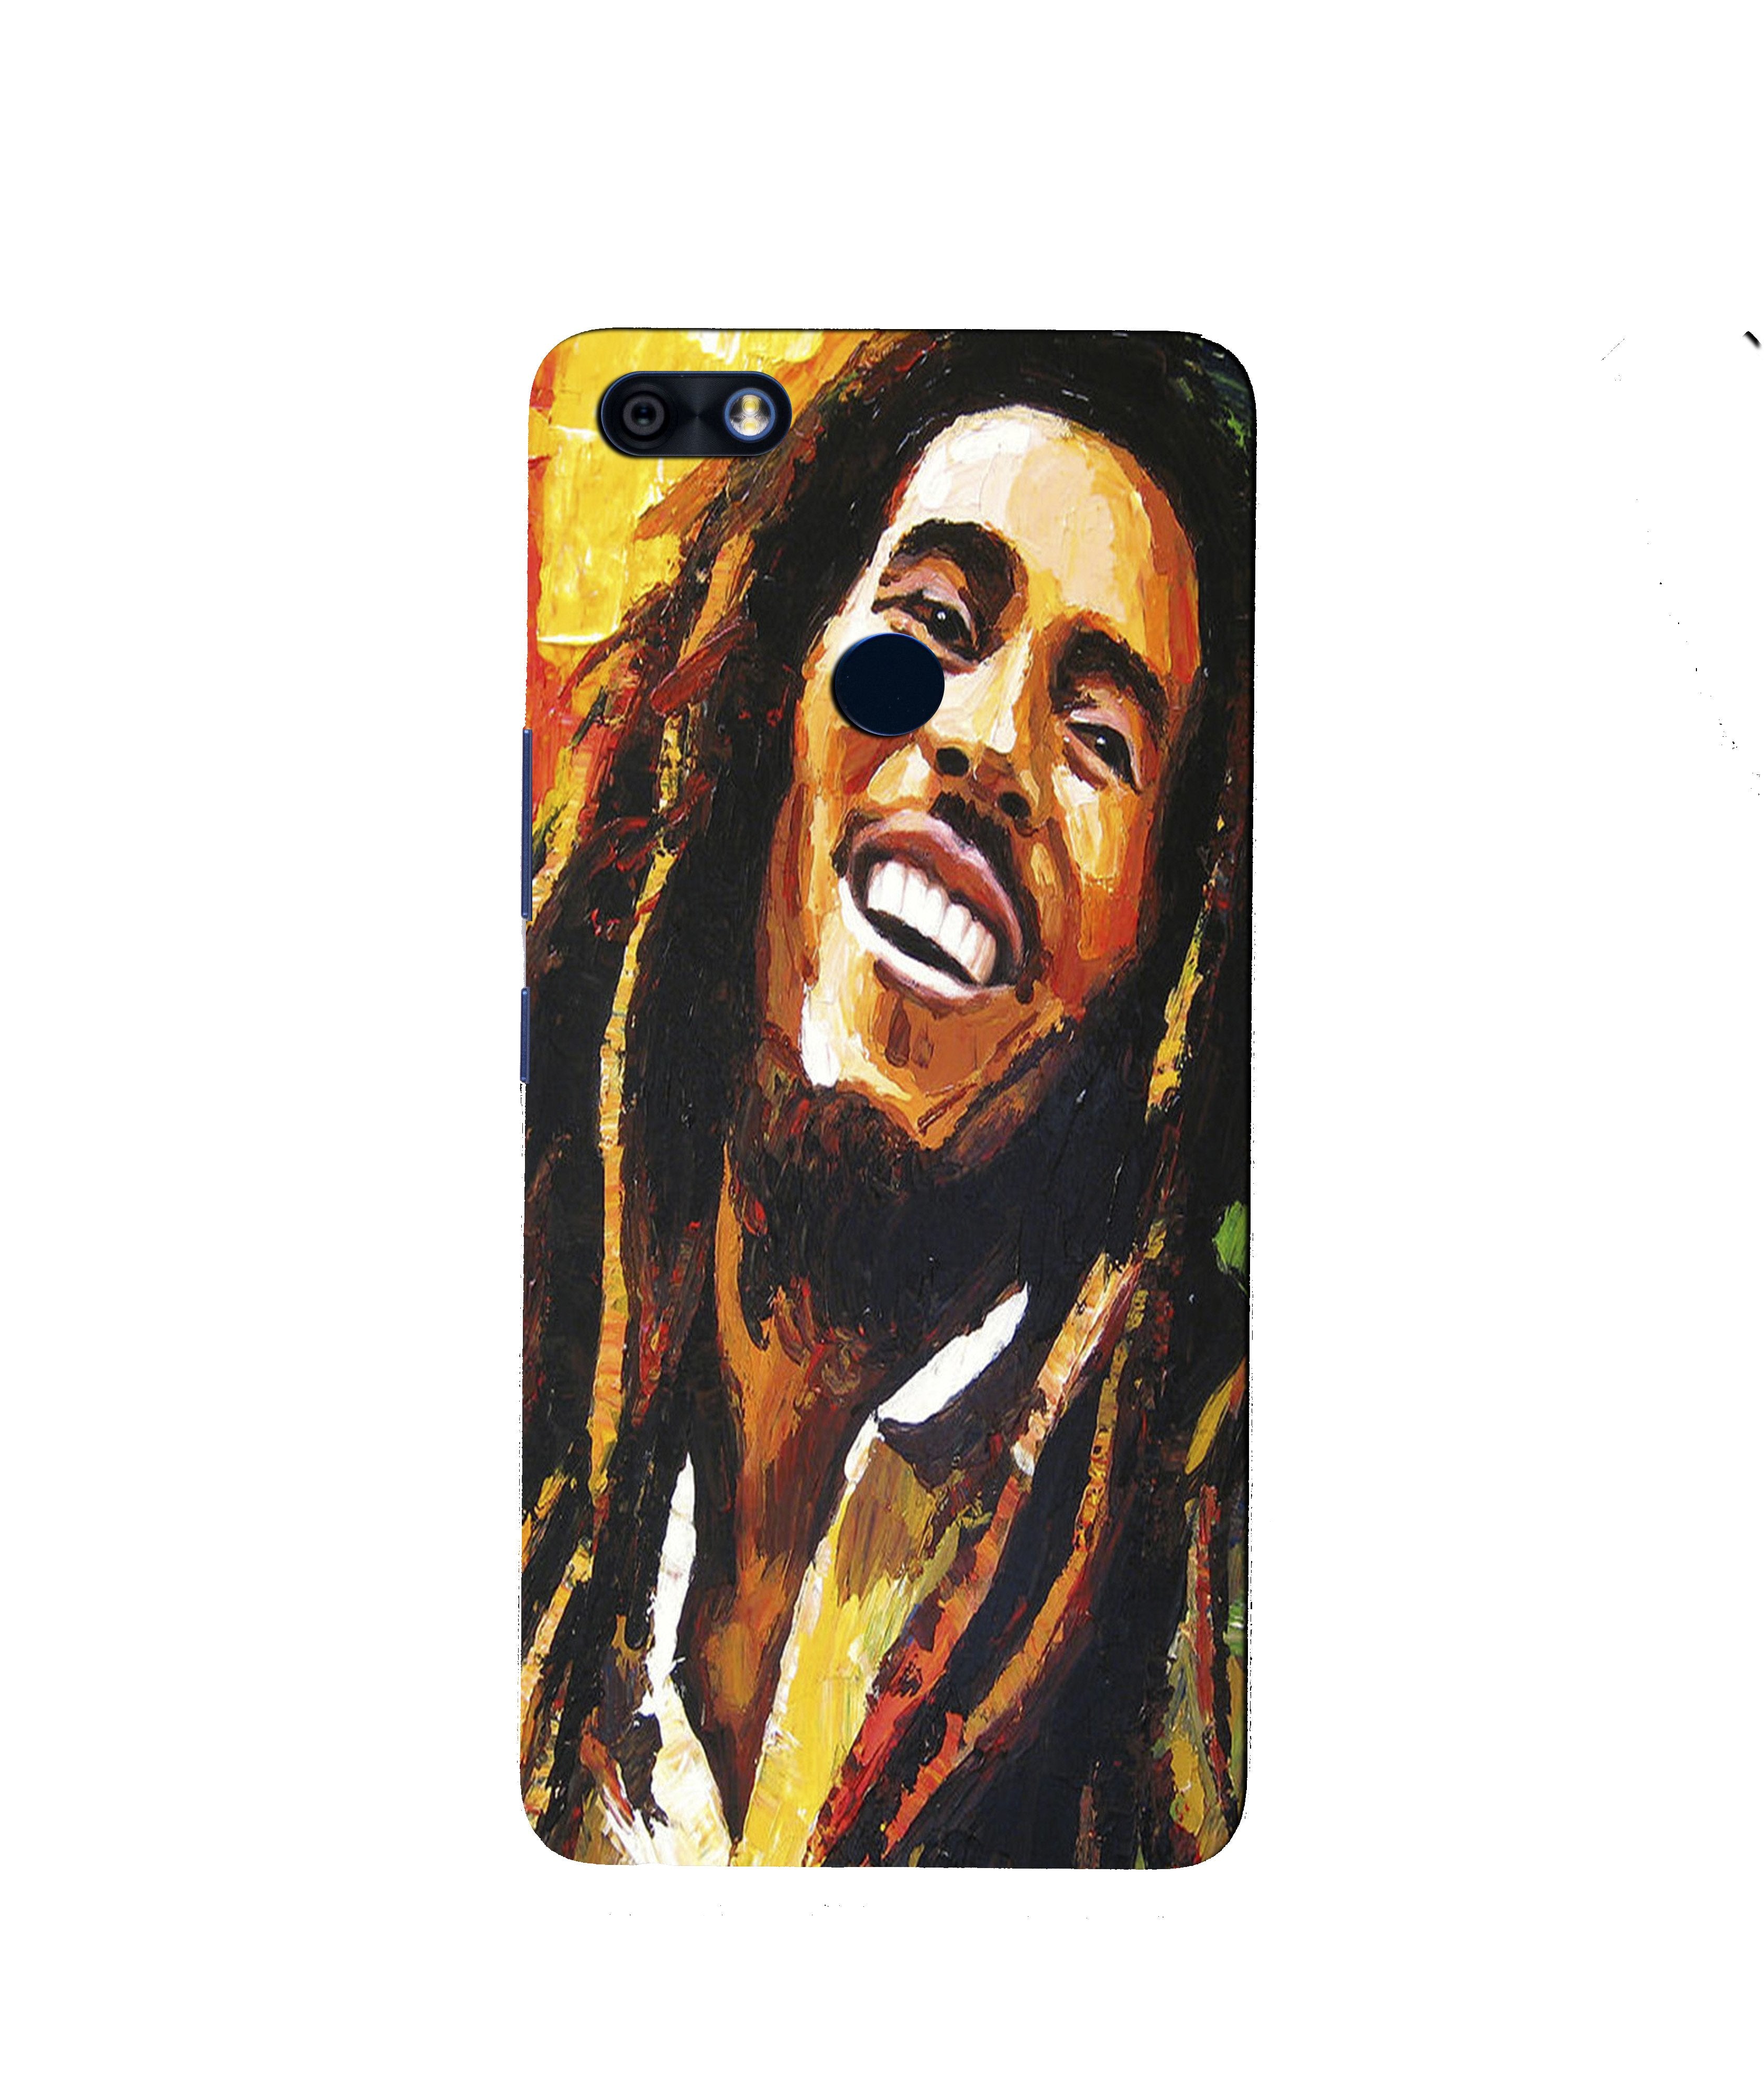 Bob marley Case for Infinix Note 5 / Note 5 Pro (Design No. 295)